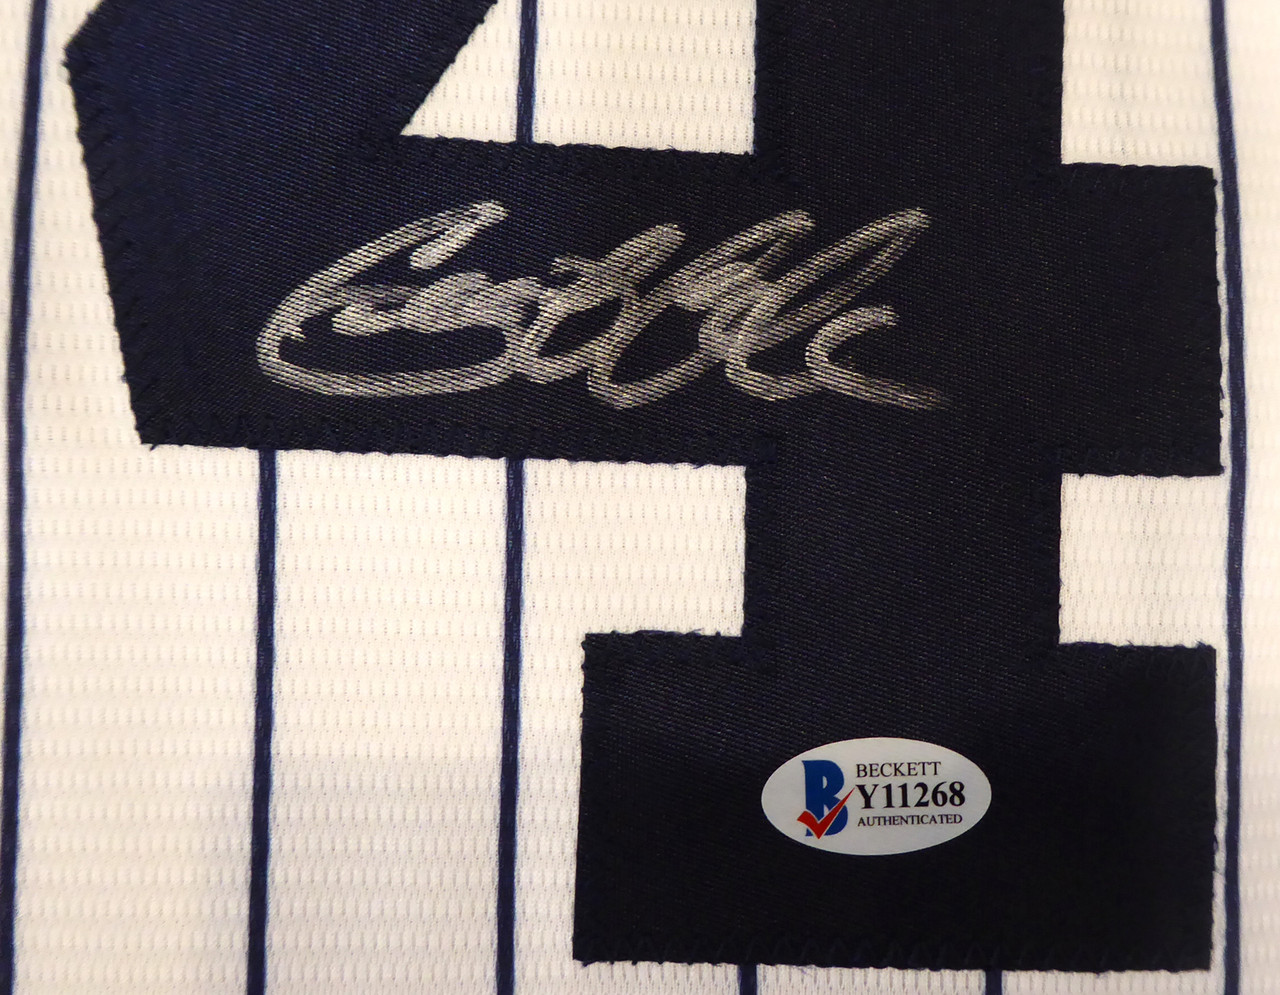 Gerrit Cole Autographed New York Yankees Framed Jersey